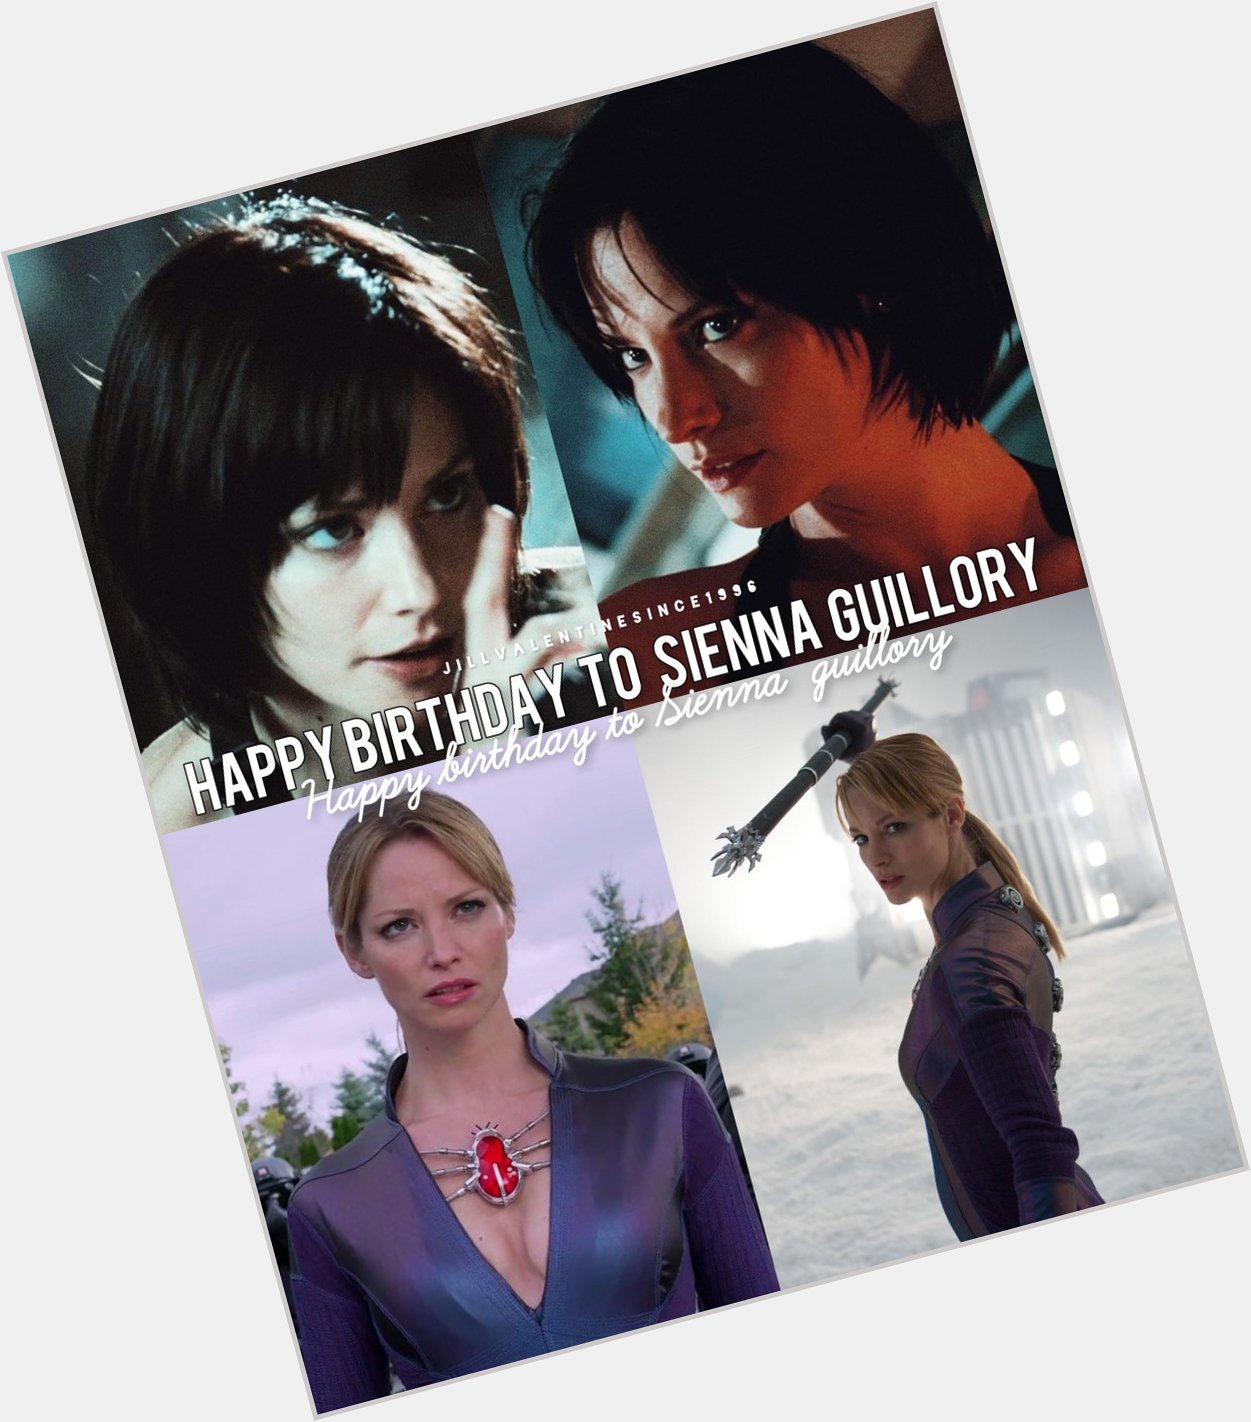 Happy Birthday to Sienna Guillory  